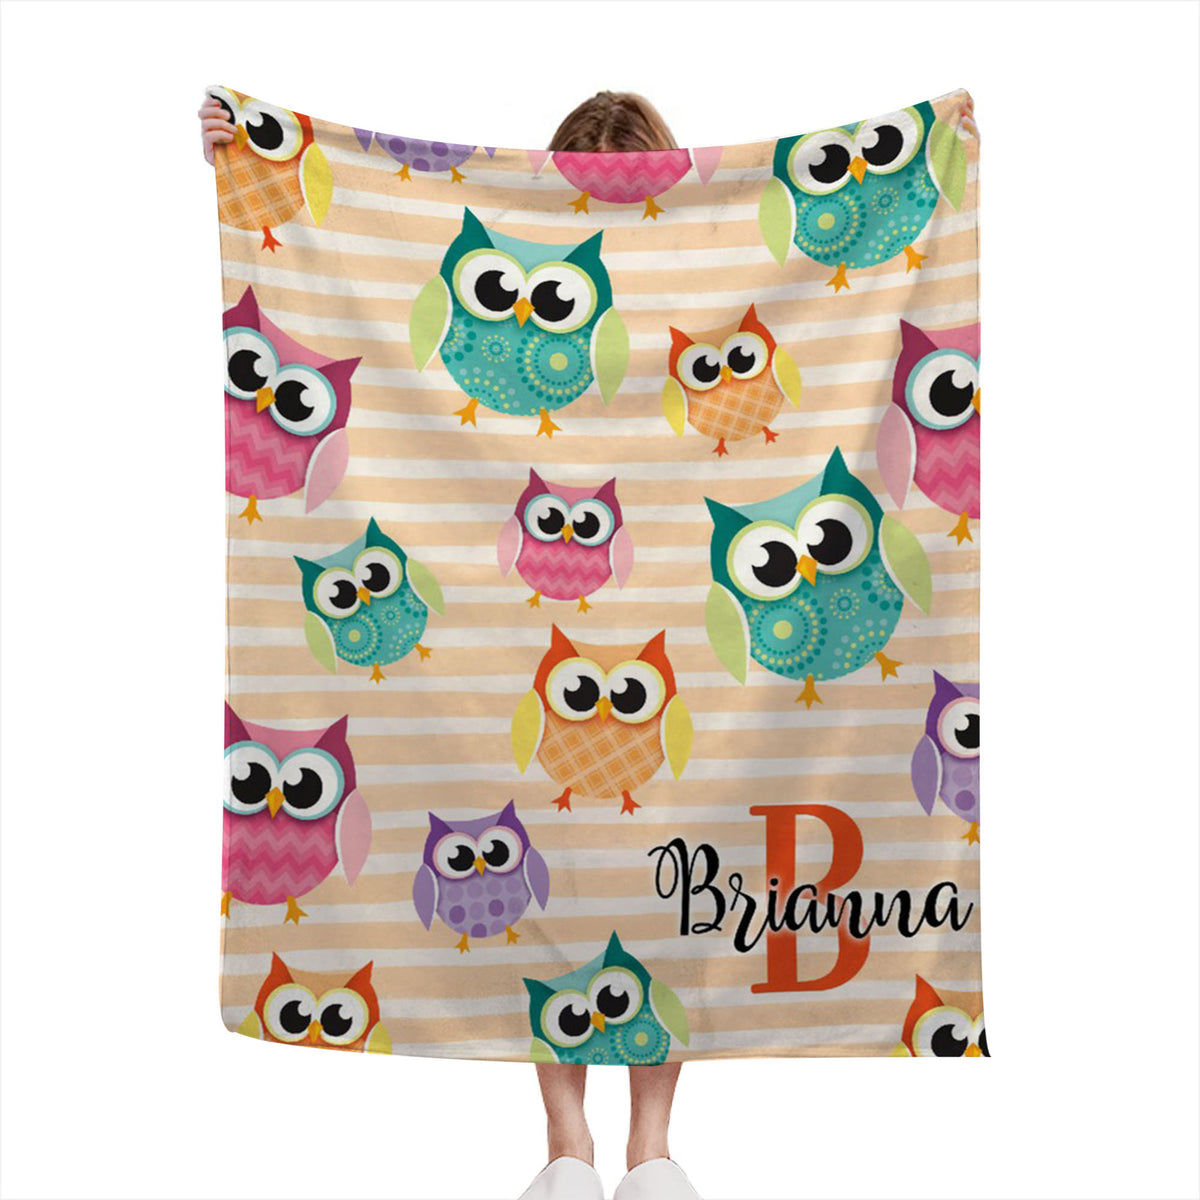 Personalized Owl Blanket With Name For Adult, Kids